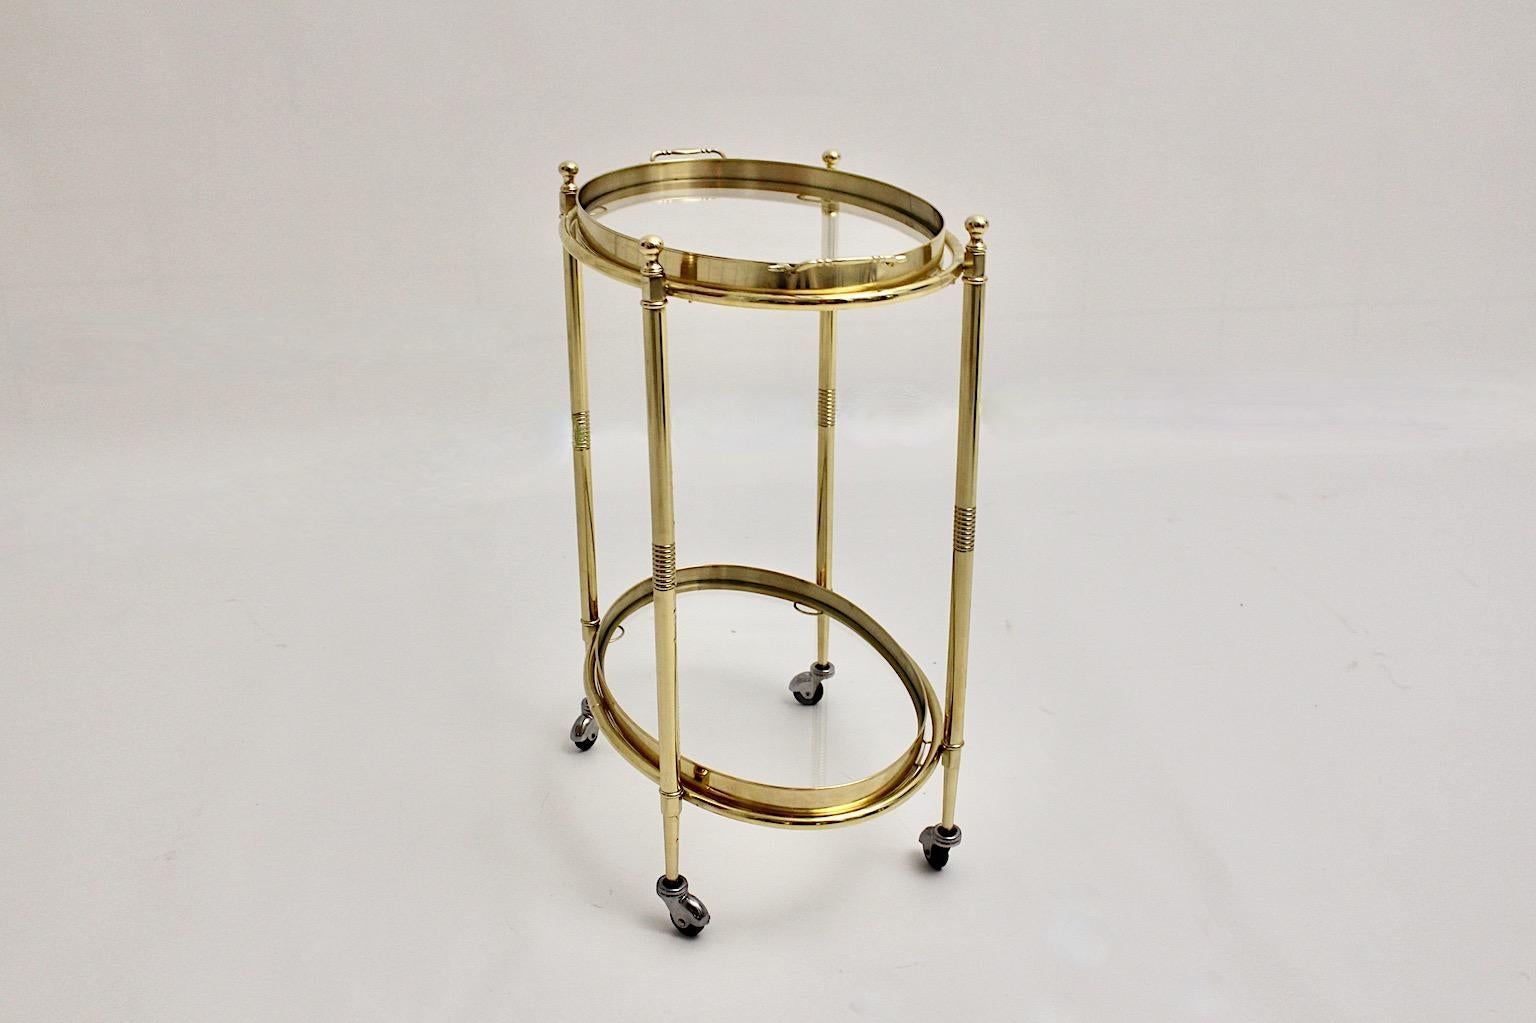 20th Century Hollywood Regency Style Vintage Brass Glass Bar Cart Side Table Italy 1970s For Sale